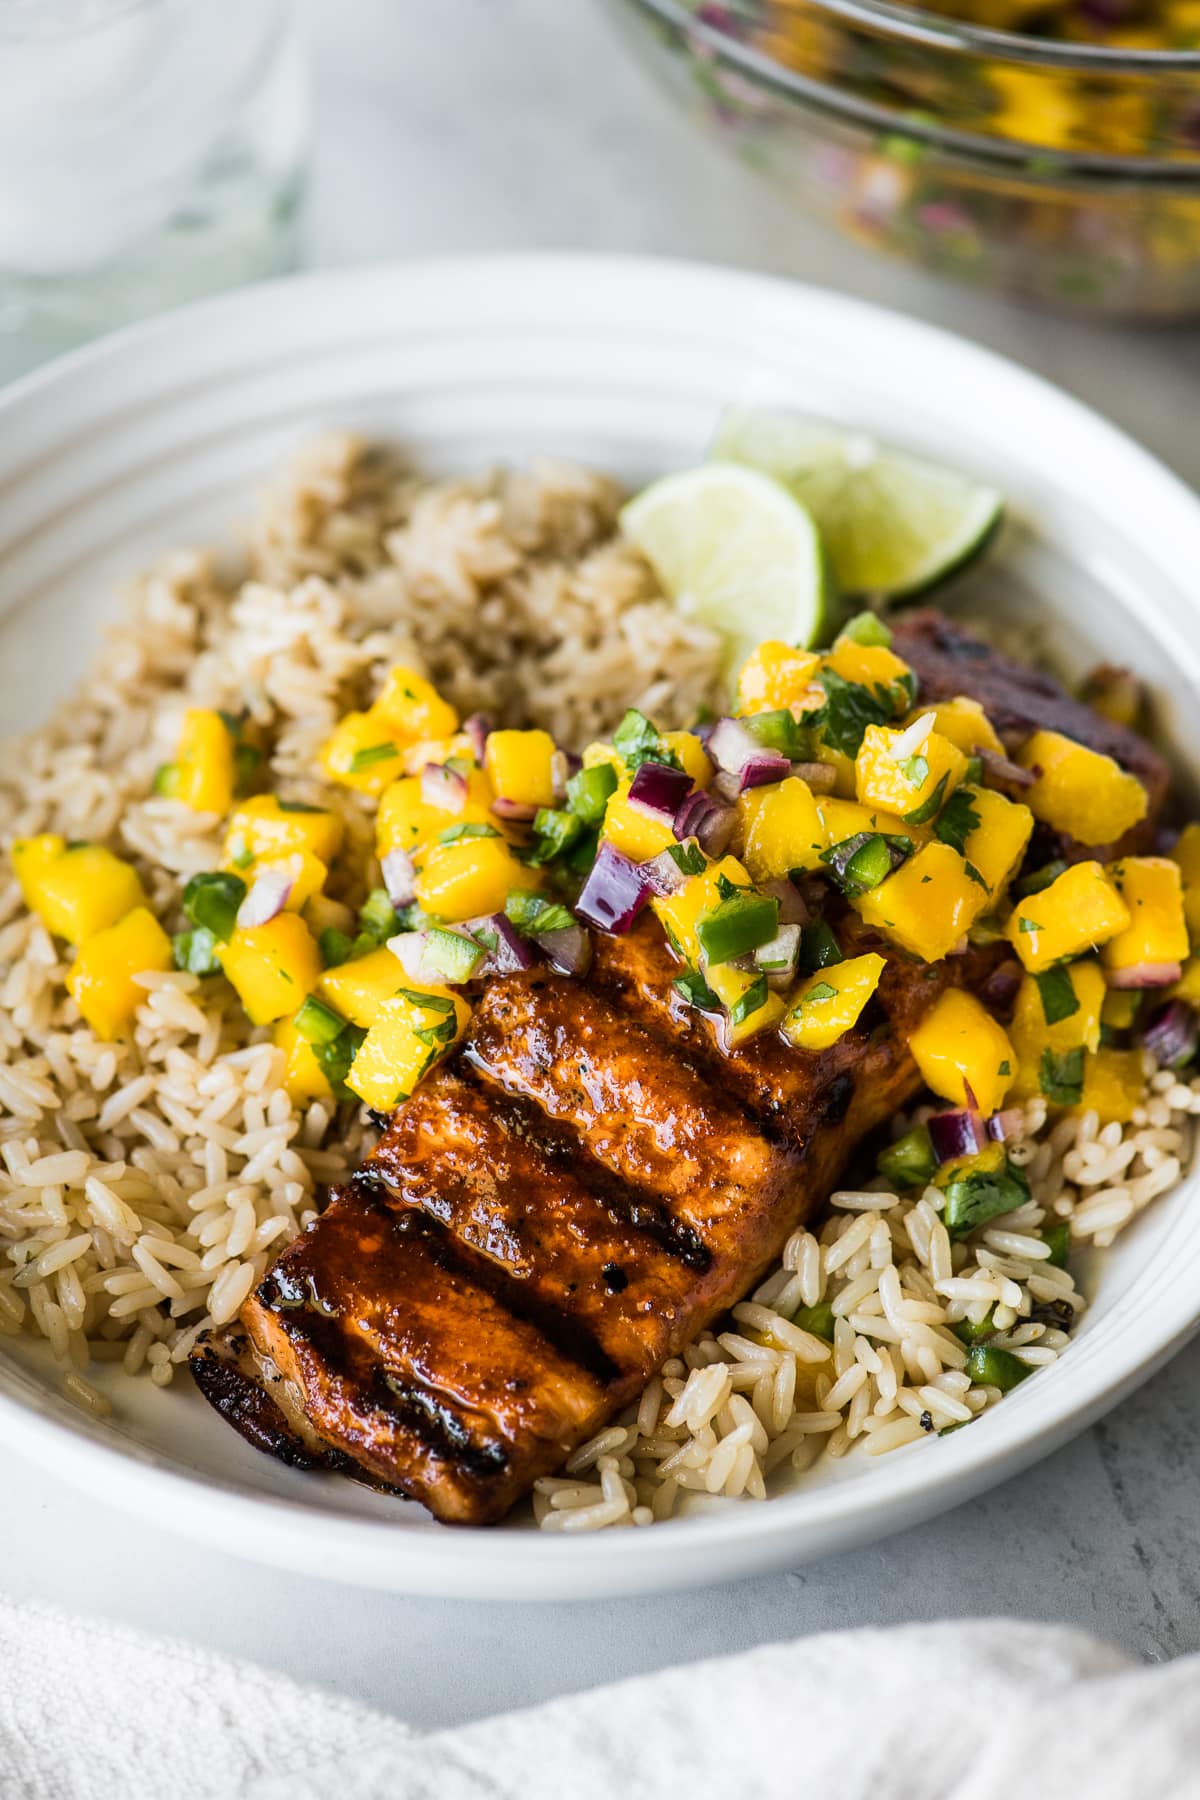 Mango salsa on top of grilled marinated salmon